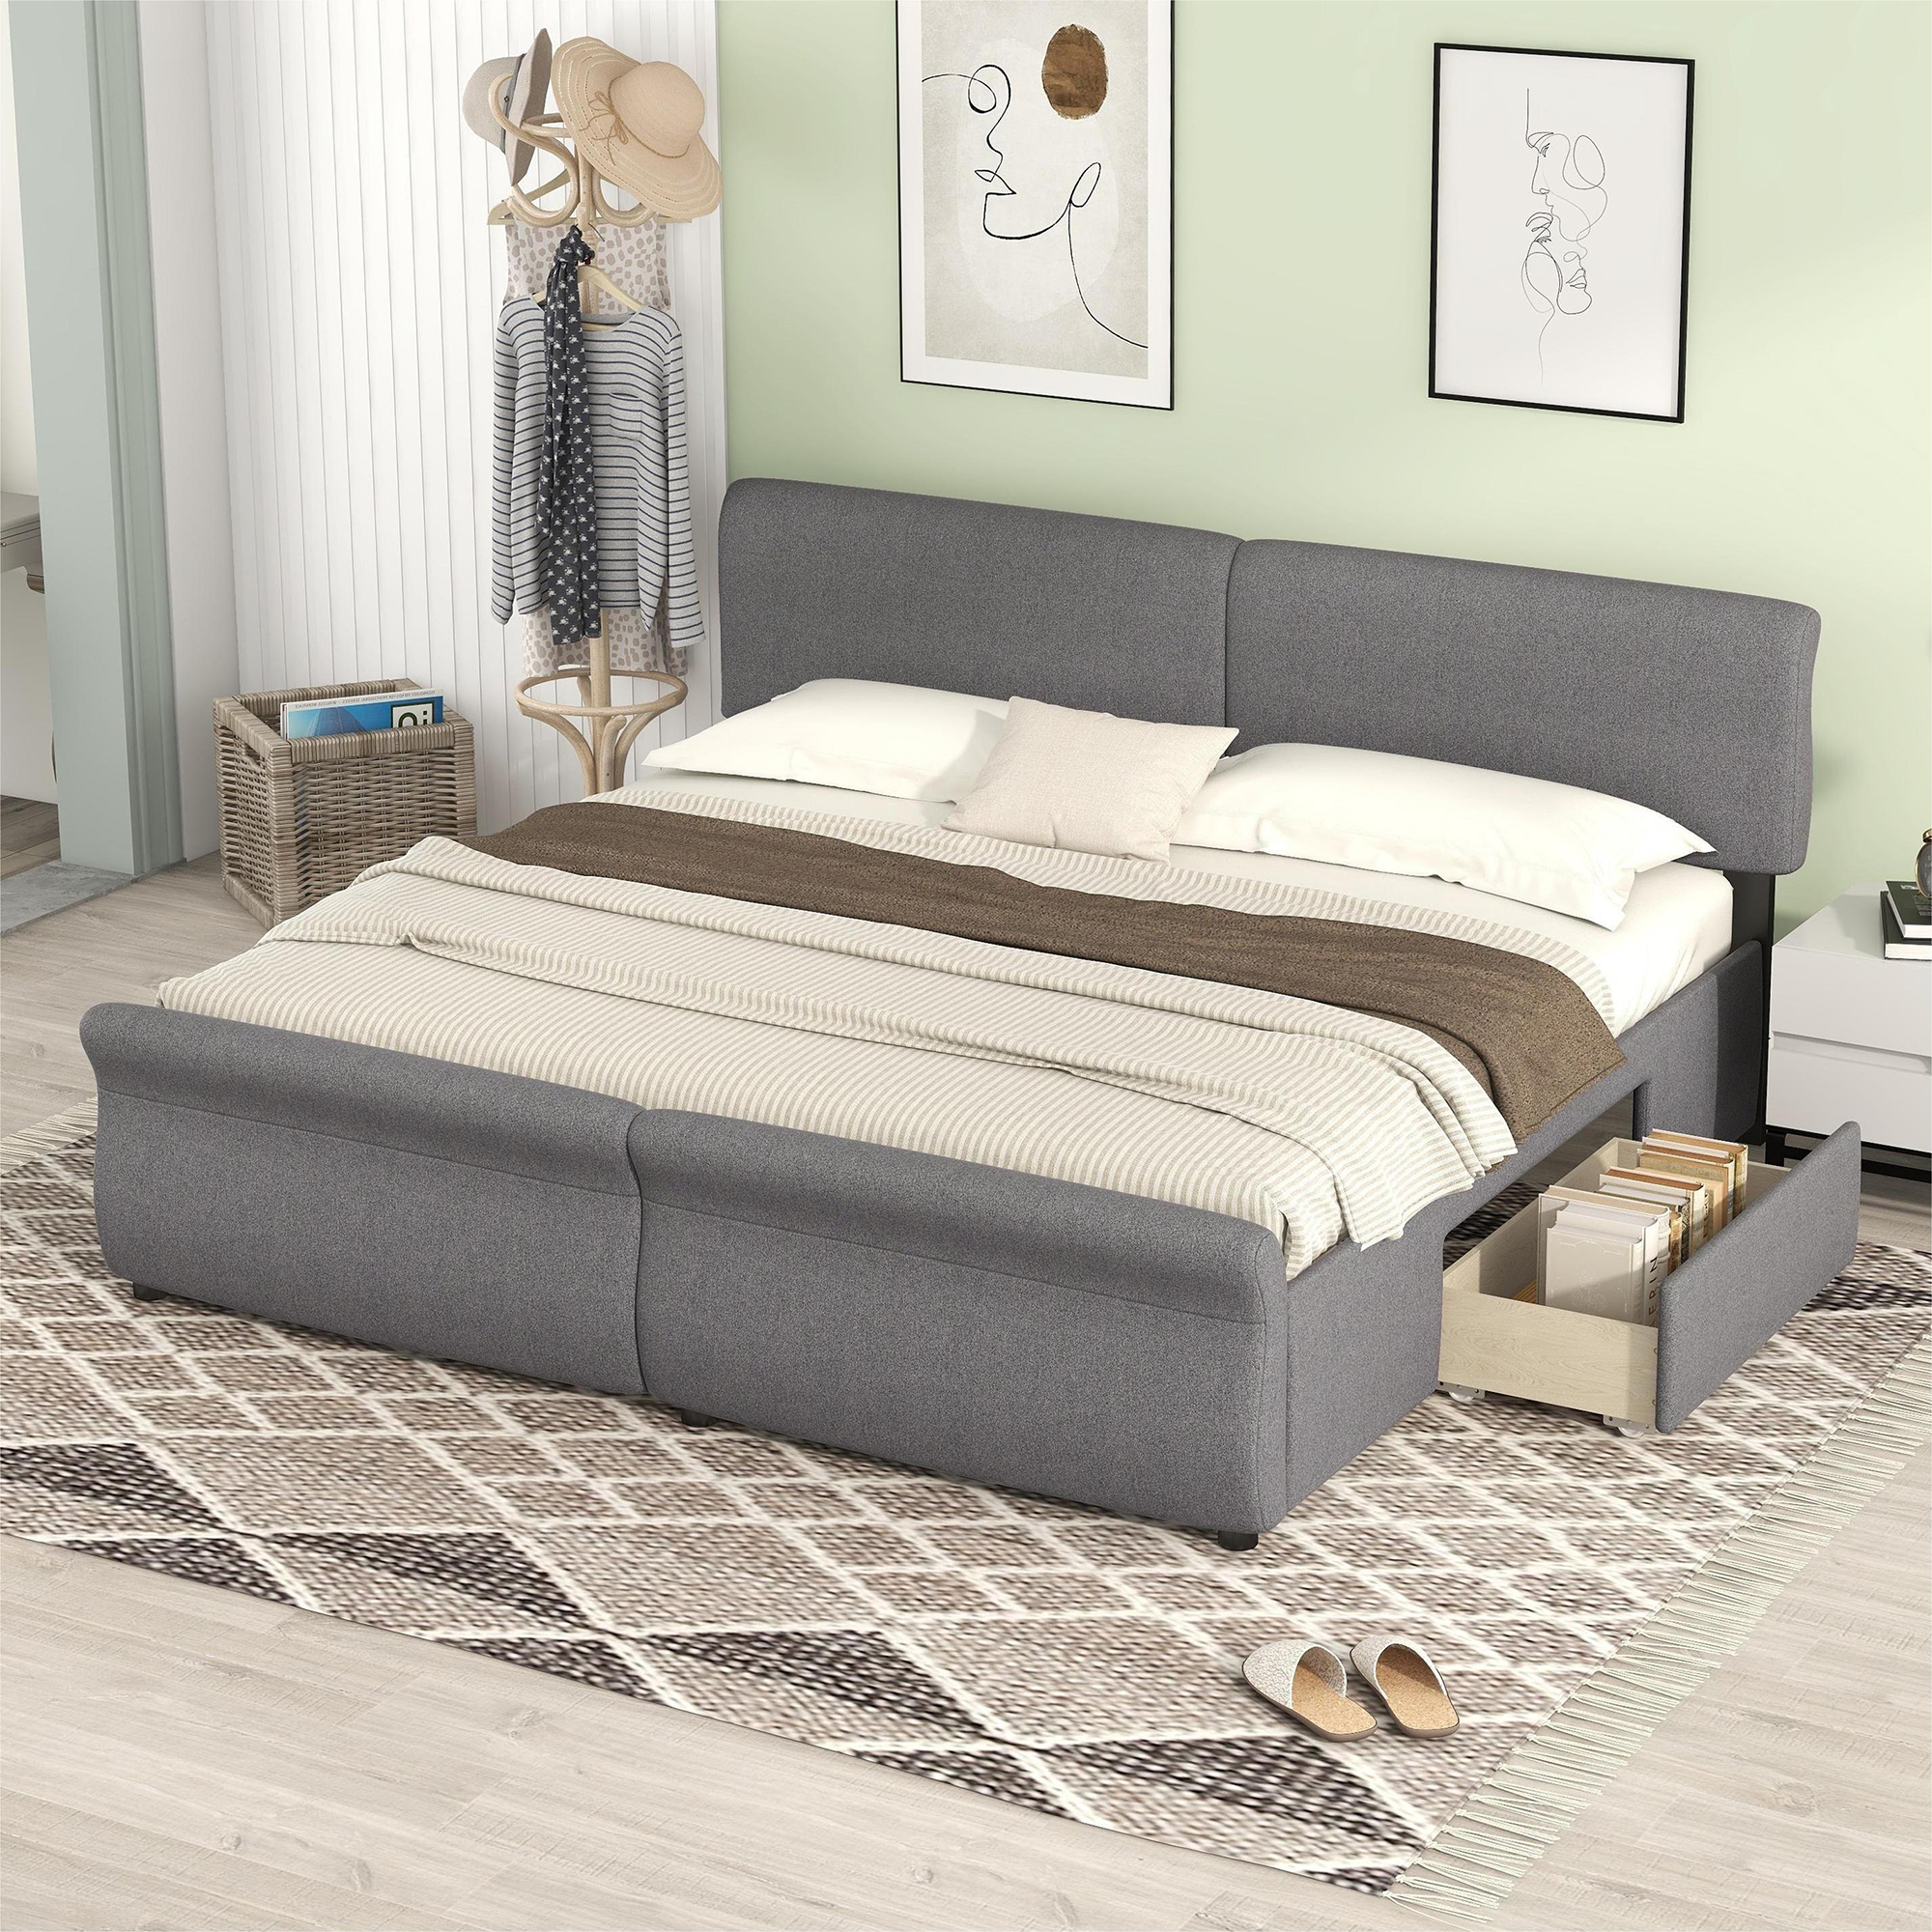 EUROCO Modern King Size Upholstery Platform Bed with Two Drawers for Kids Teen Adults, Upholstery Headboard, Gray - image 1 of 16